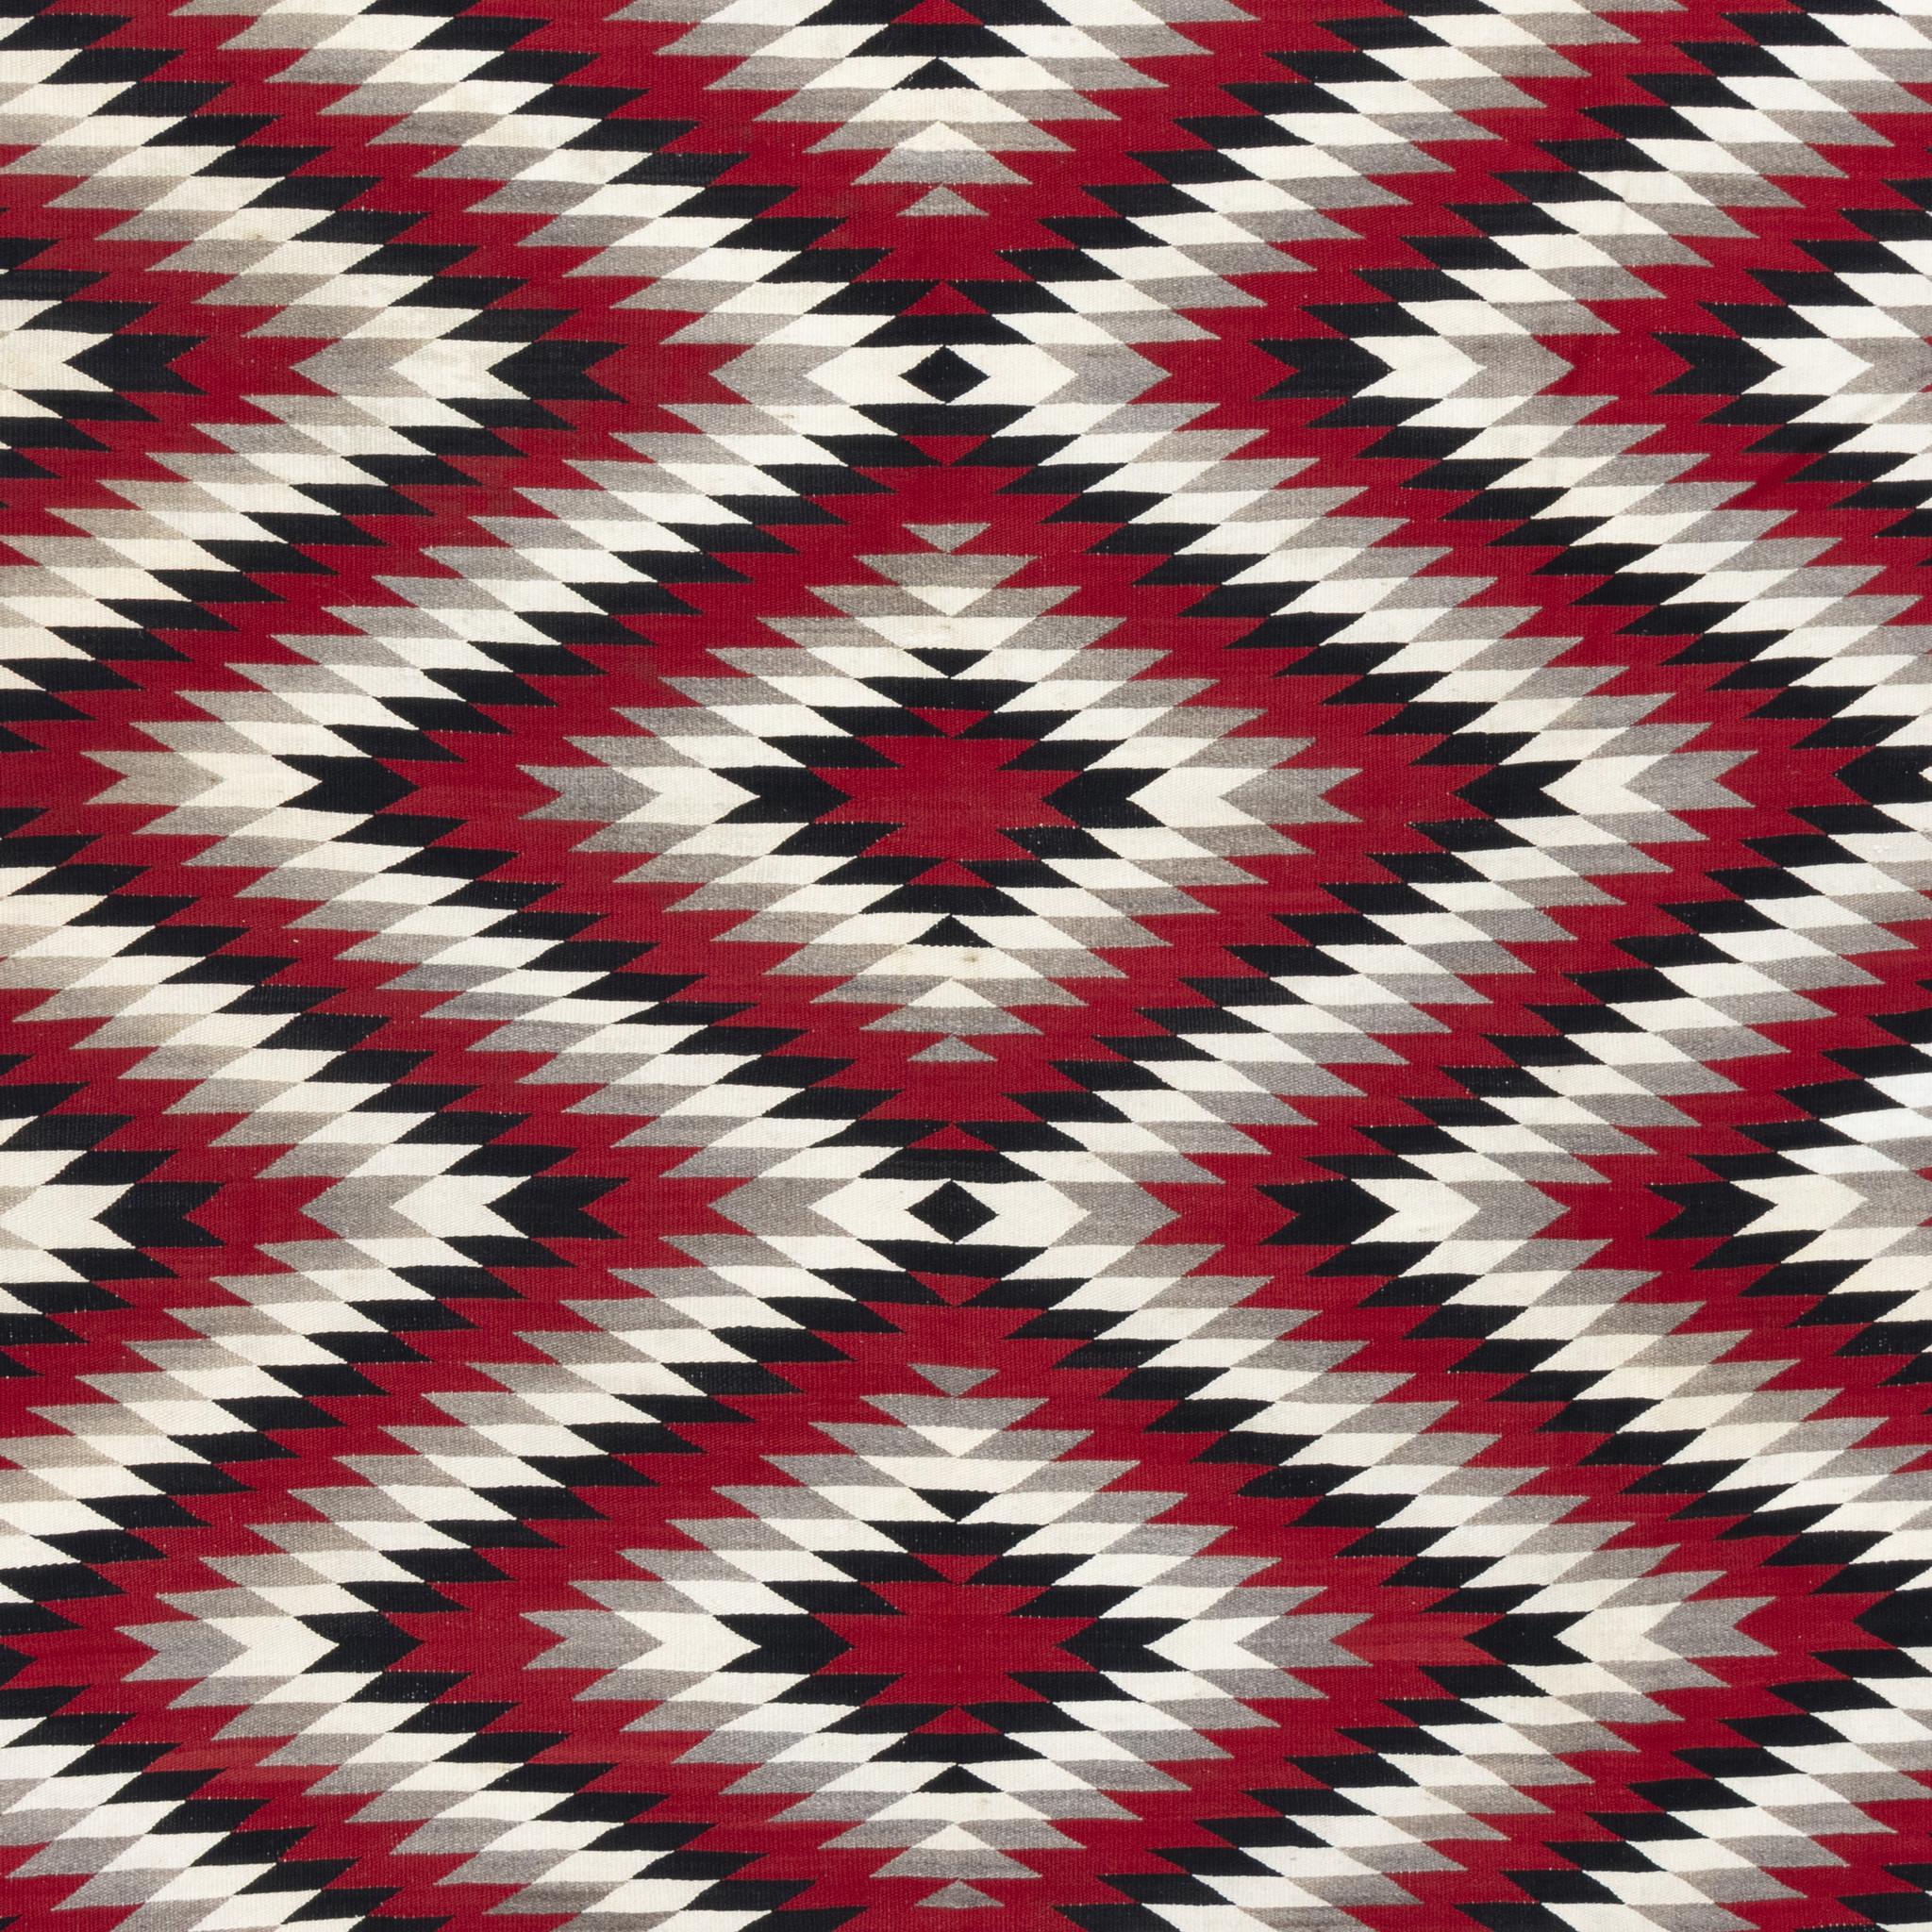 Large Navajo dazzler area weaving. This stunning piece features bright contrasted colors of white, grey, red, and black in crystal geometric patterns. Great for an area rug or large wall display piece. Early 20th century. Size: 8'10